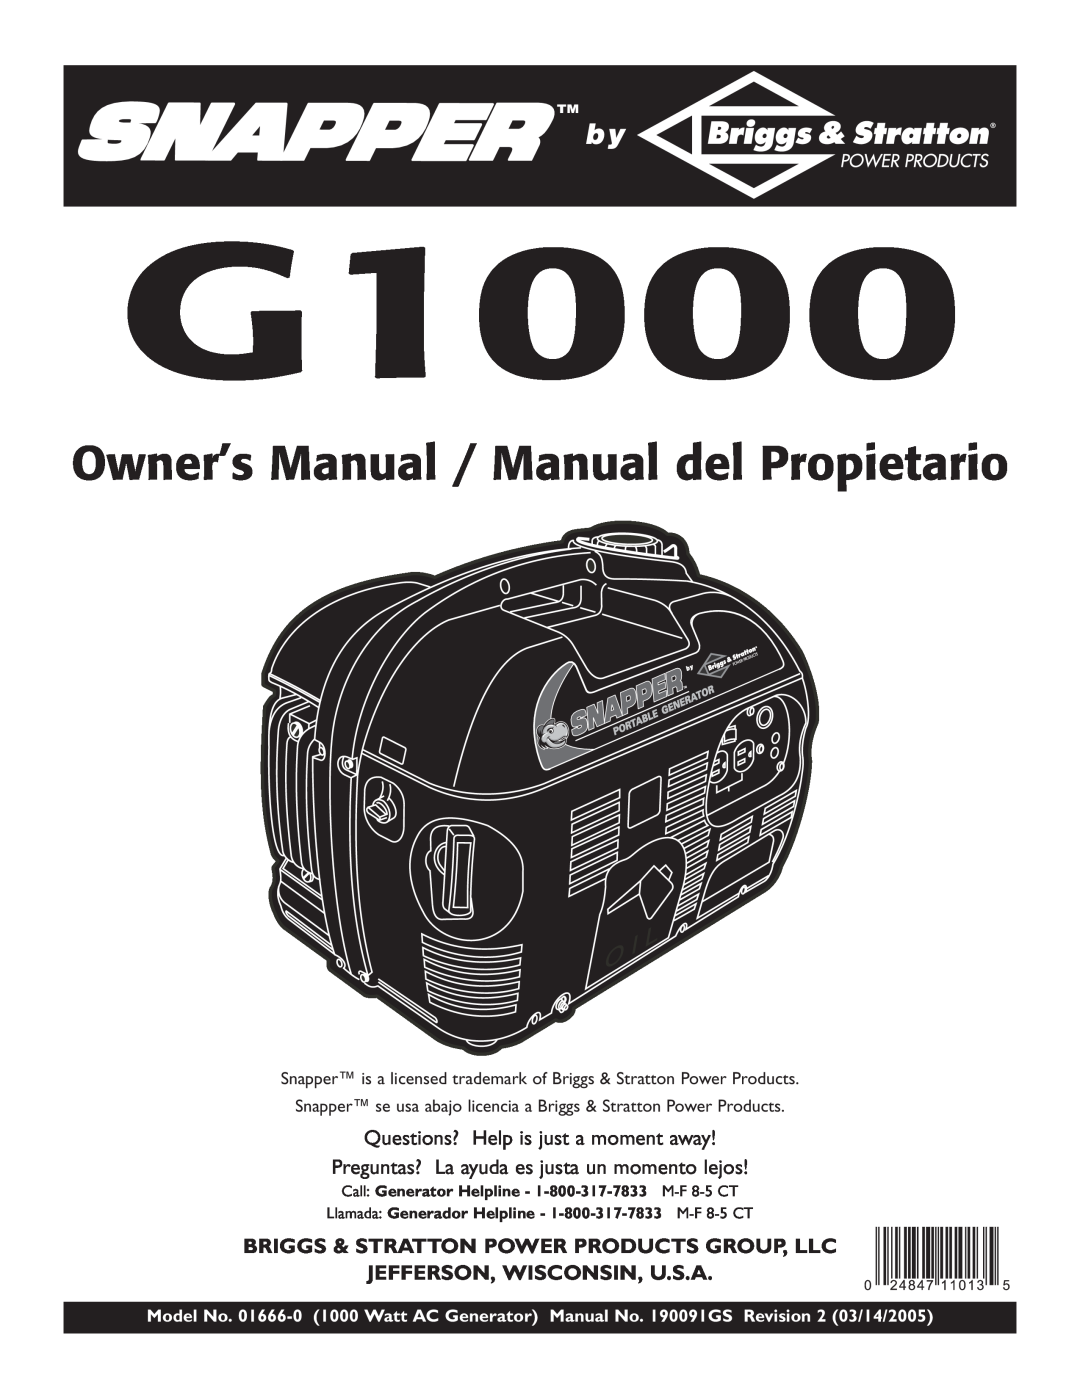 Snapper G1000 owner manual Briggs & Stratton Power Products Group, Llc, Jefferson, Wisconsin, U.S.A 